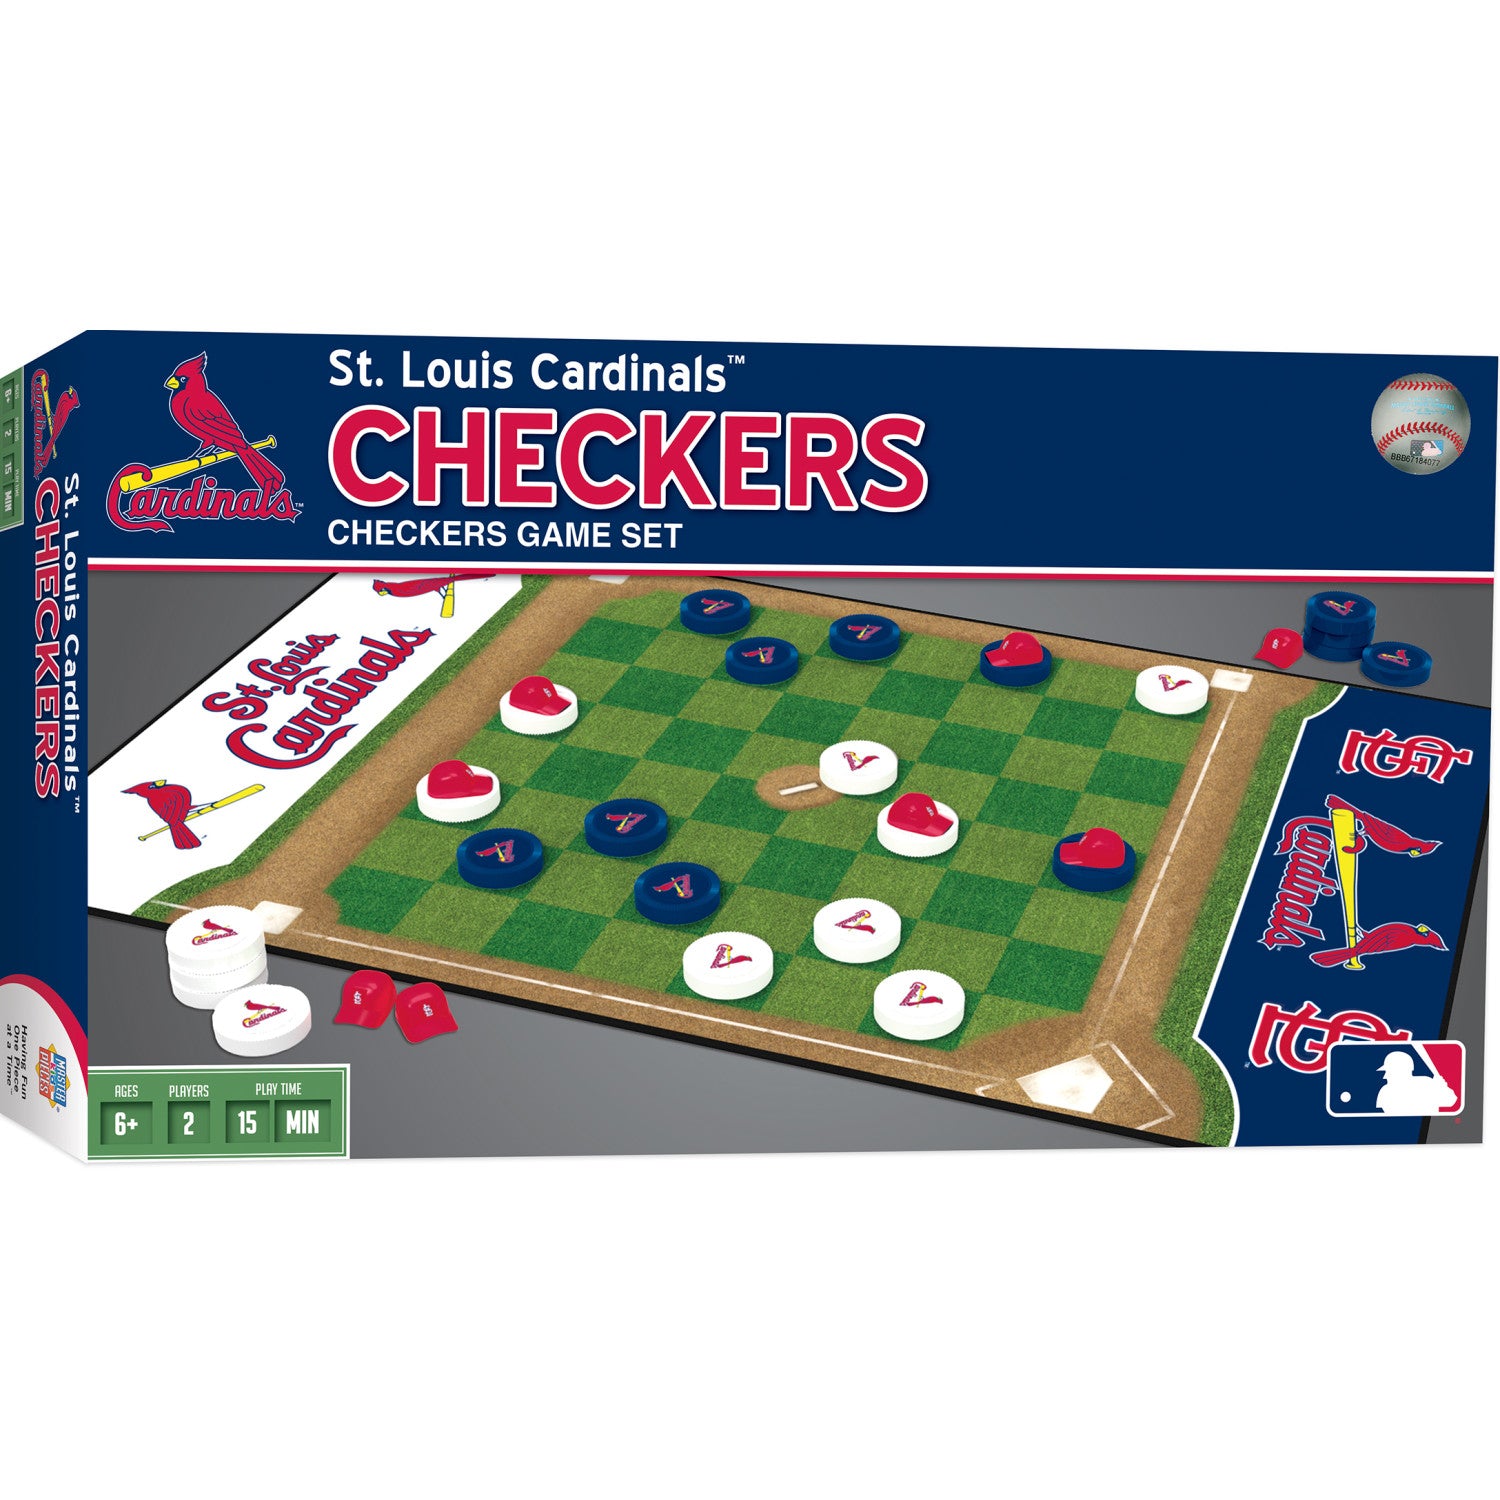 St. Louis Cardinals Checkers Board Game